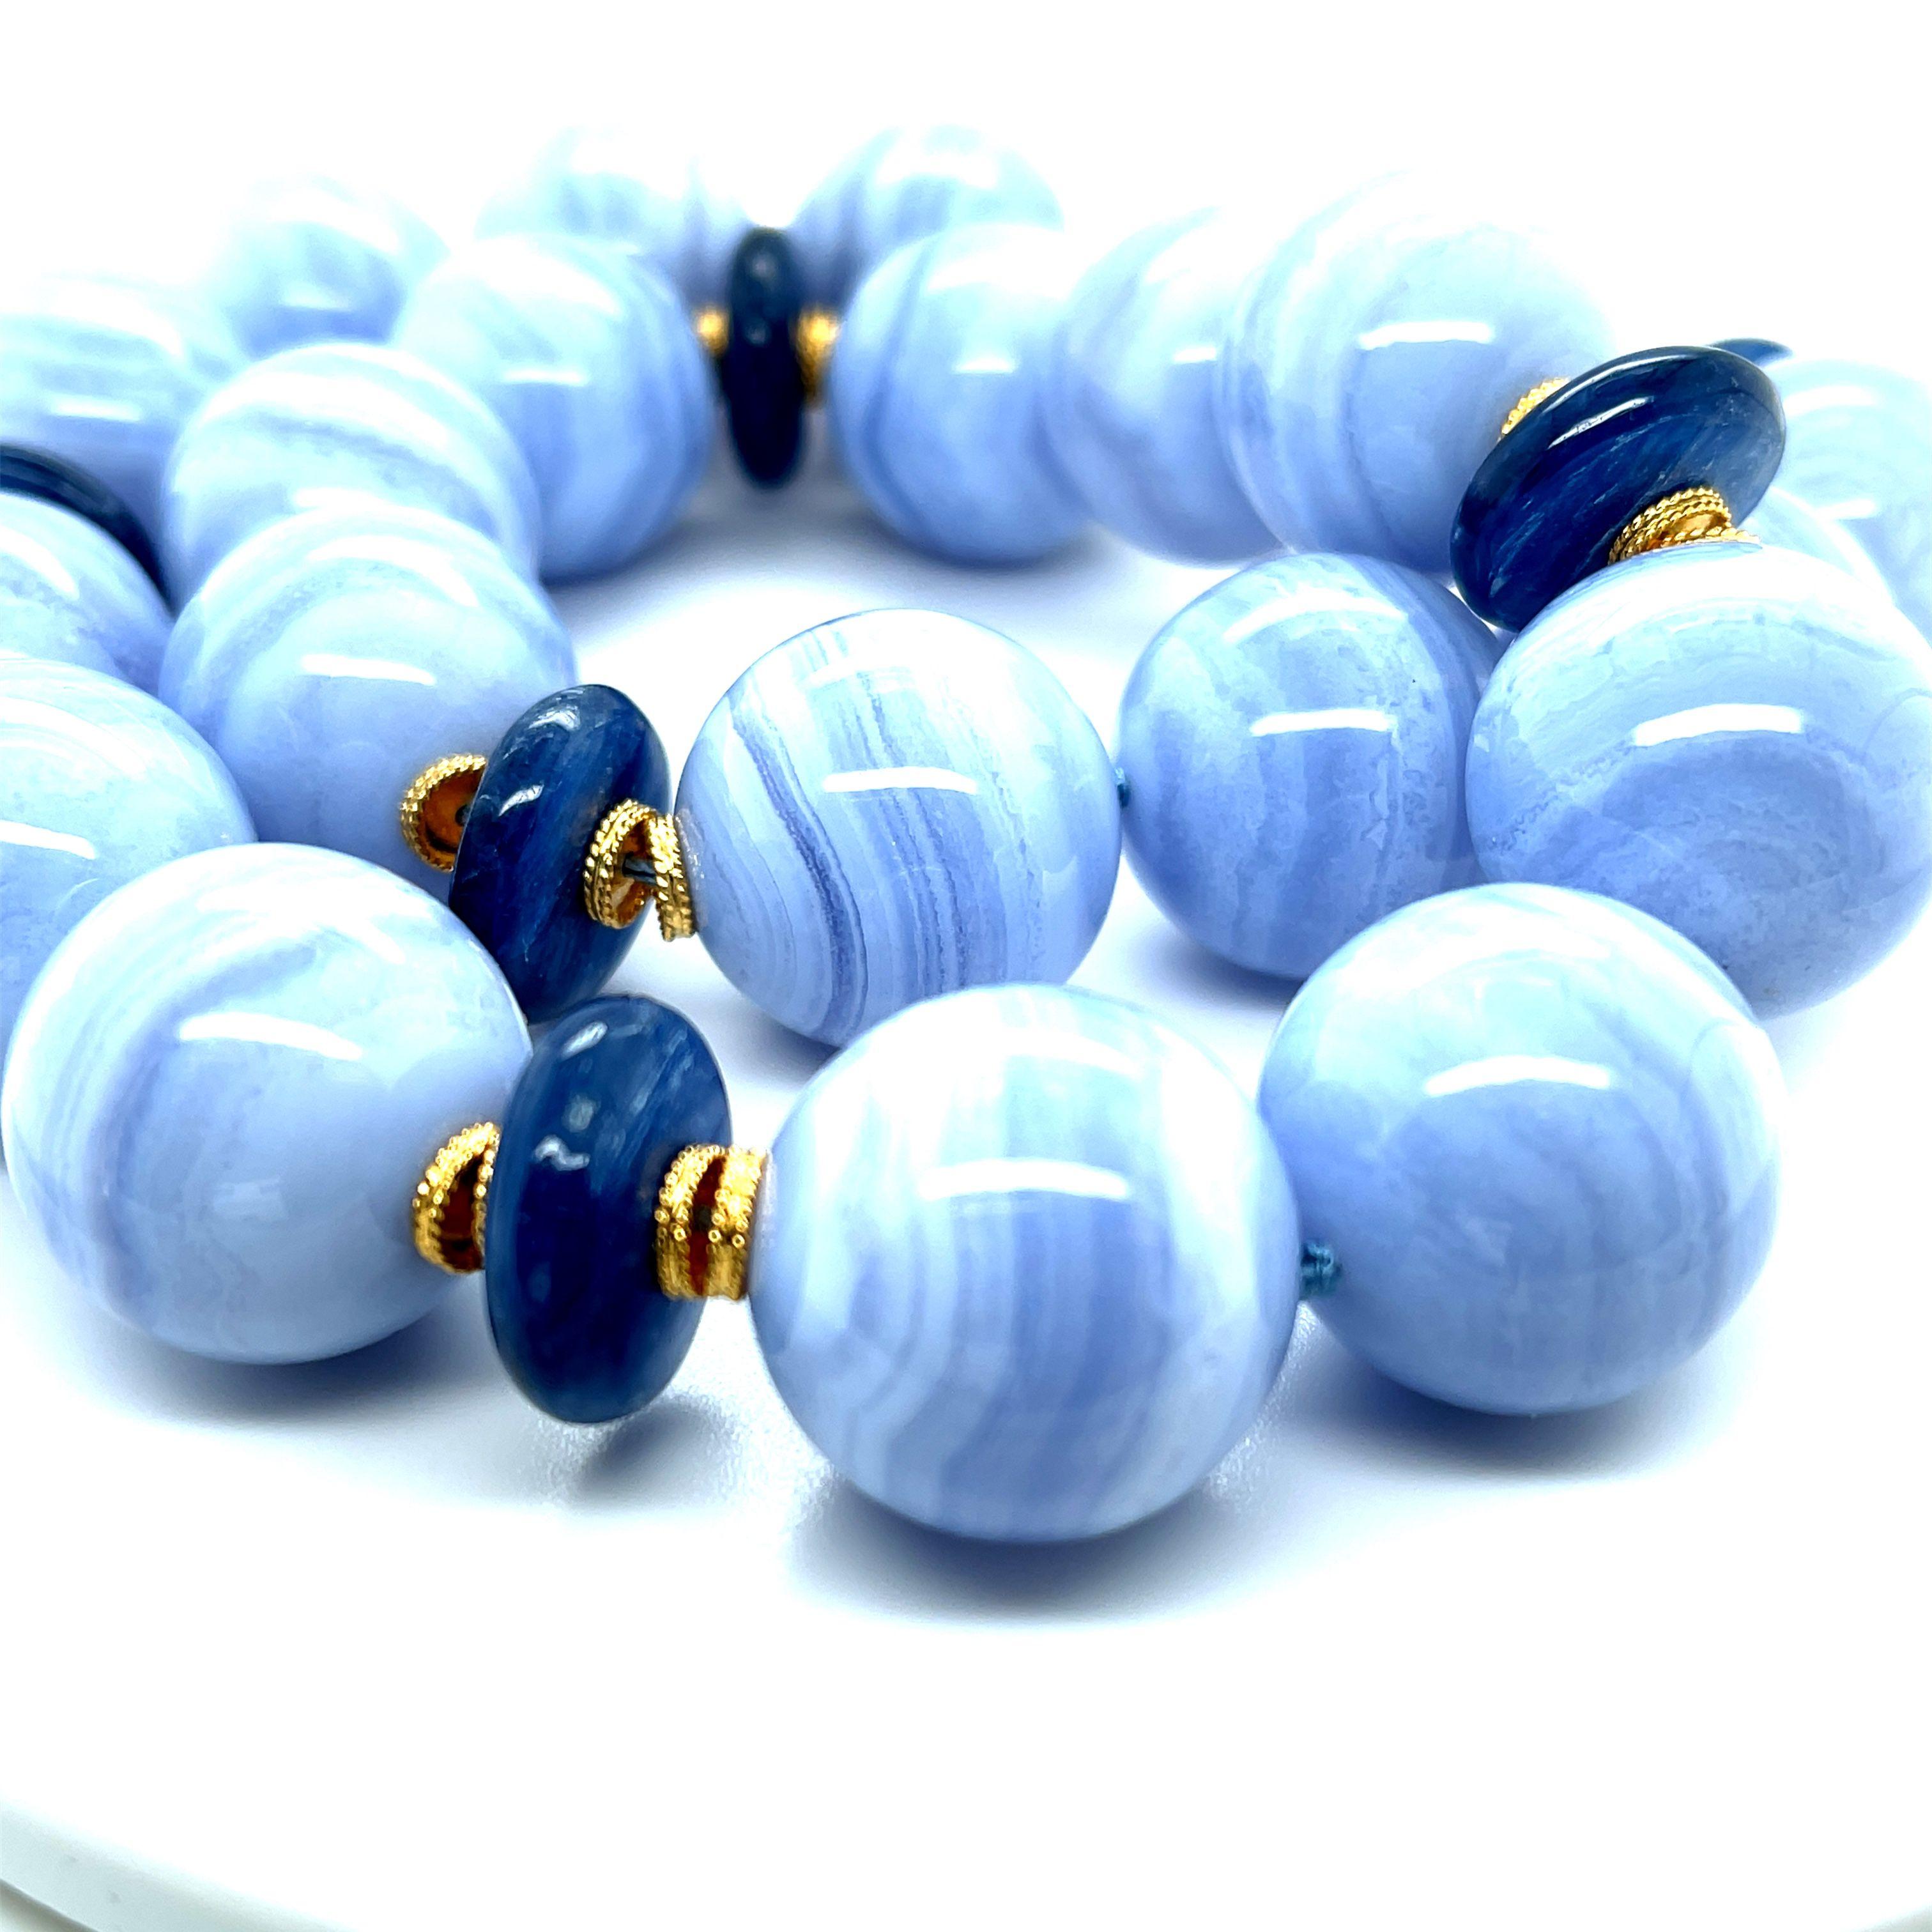 Artisan 20mm Round Blue Lace Agate and Kyanite Bead Necklace with Yellow Gold Accents For Sale